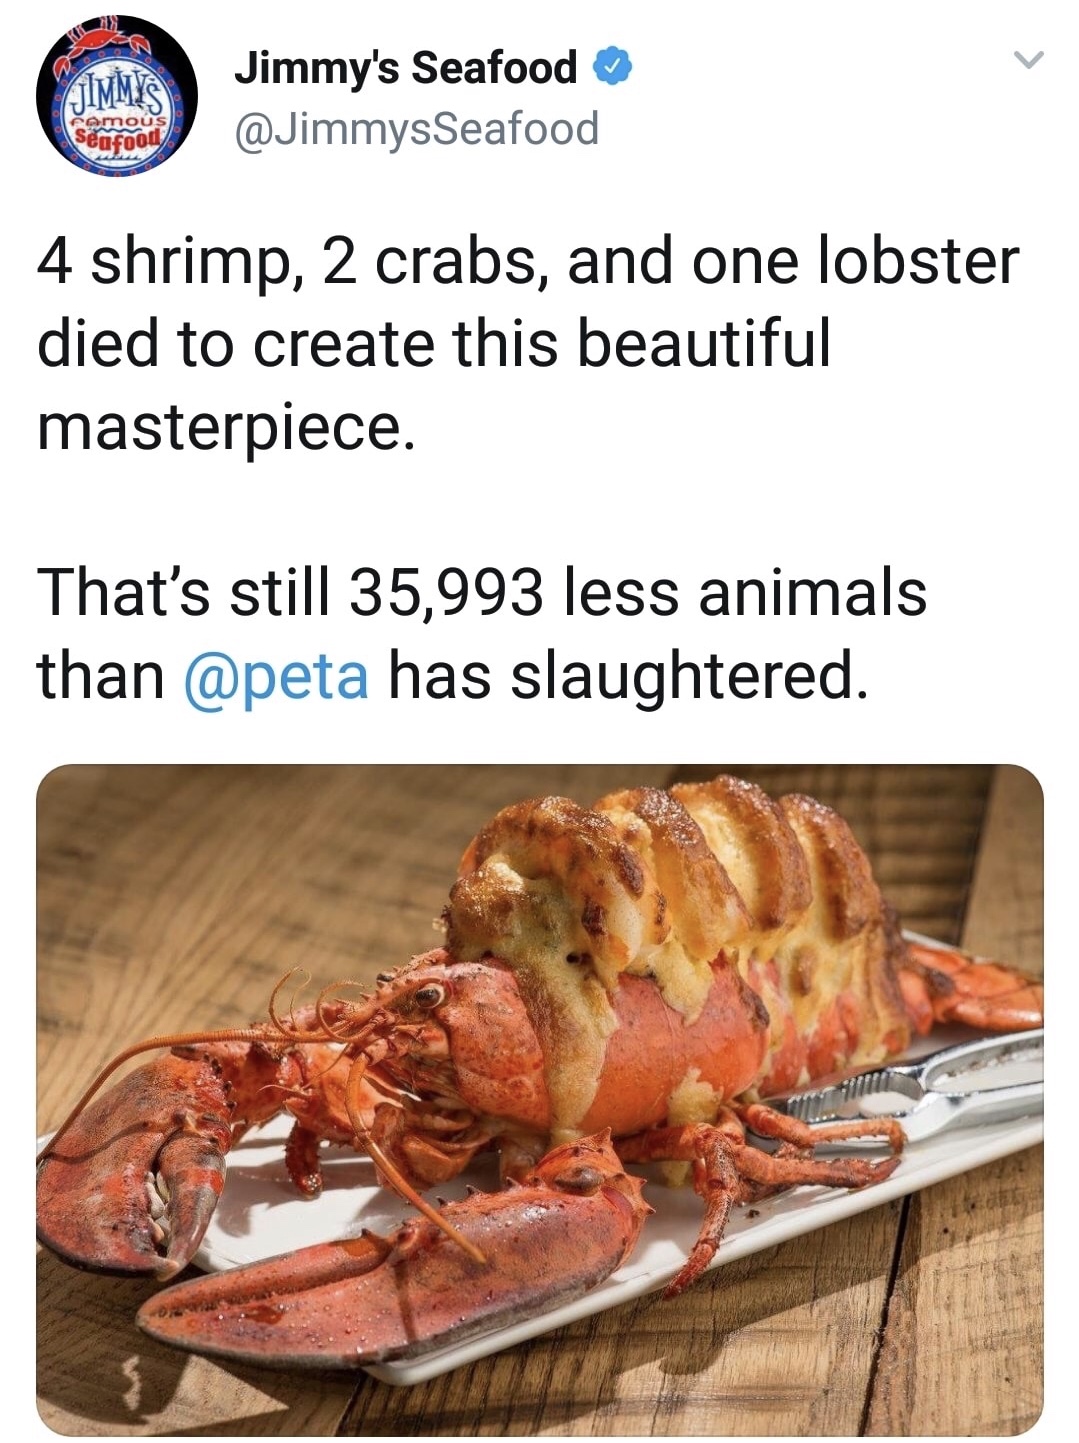 memes - jimmys seafood - Imys Jimmy's Seafood 4 shrimp, 2 crabs, and one lobster died to create this beautiful masterpiece. That's still 35,993 less animals than has slaughtered.